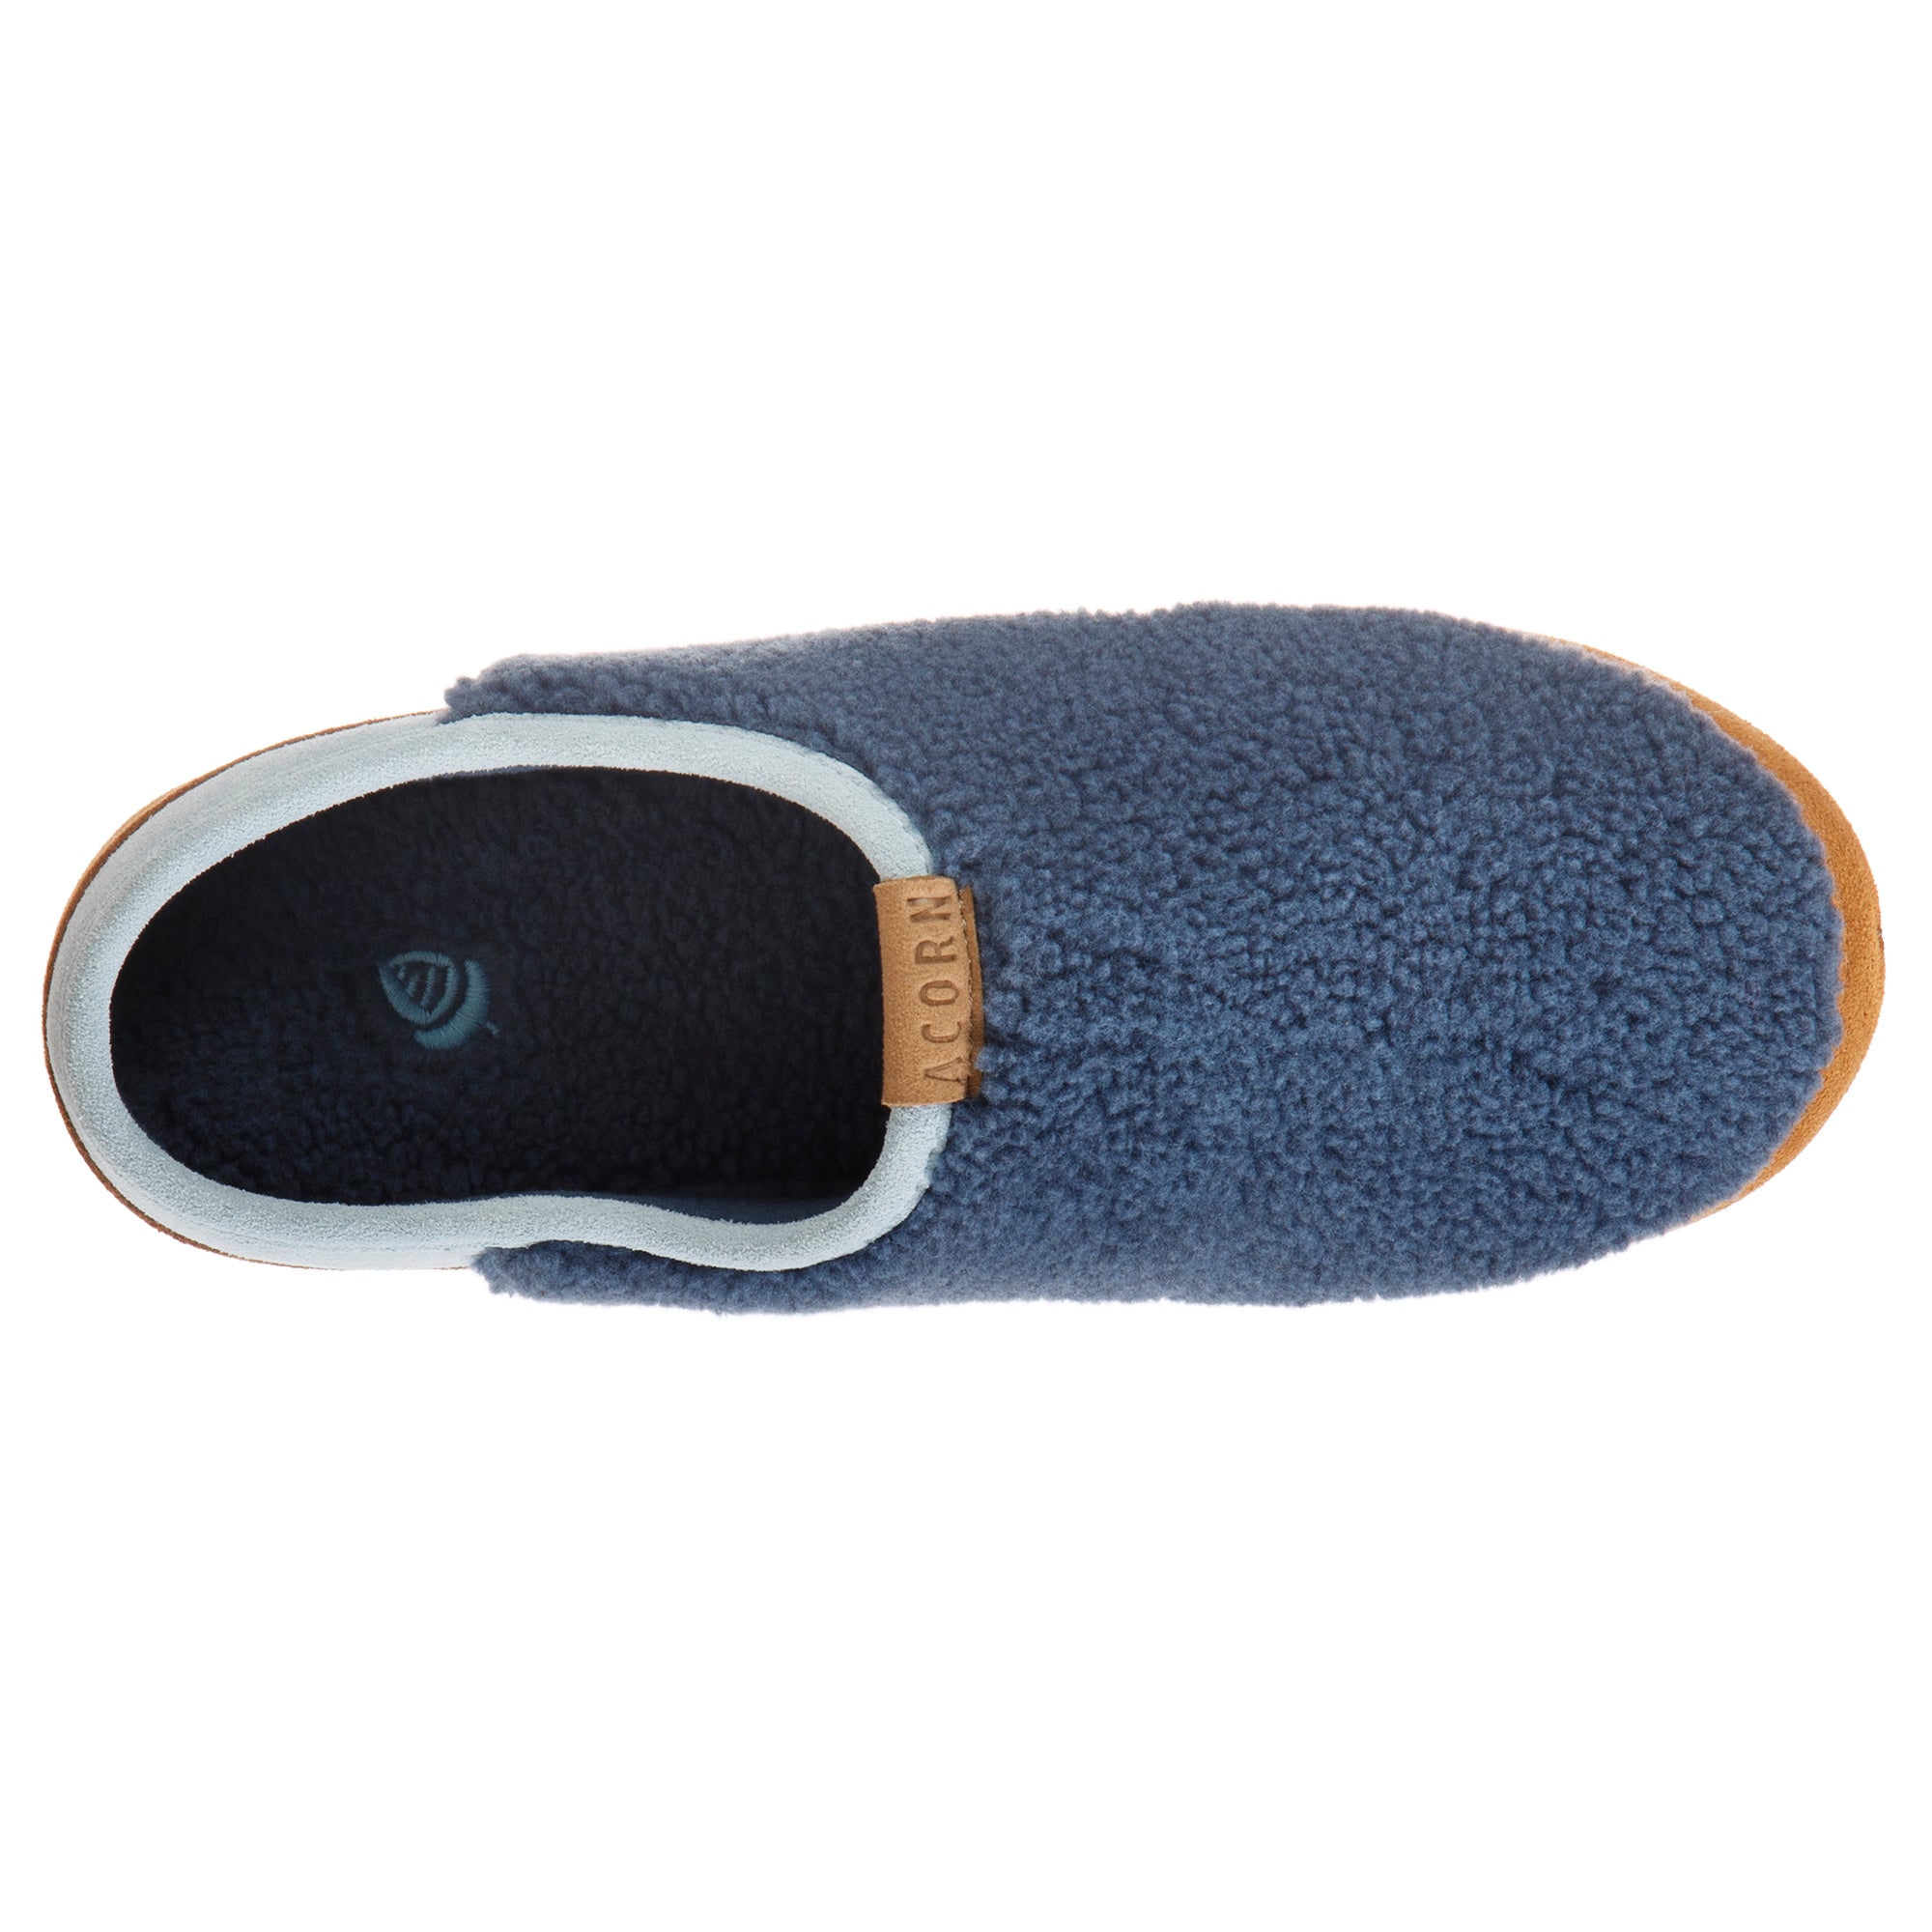 Women's Recycled Harbor Clog with Cloud Cushion® Comfort